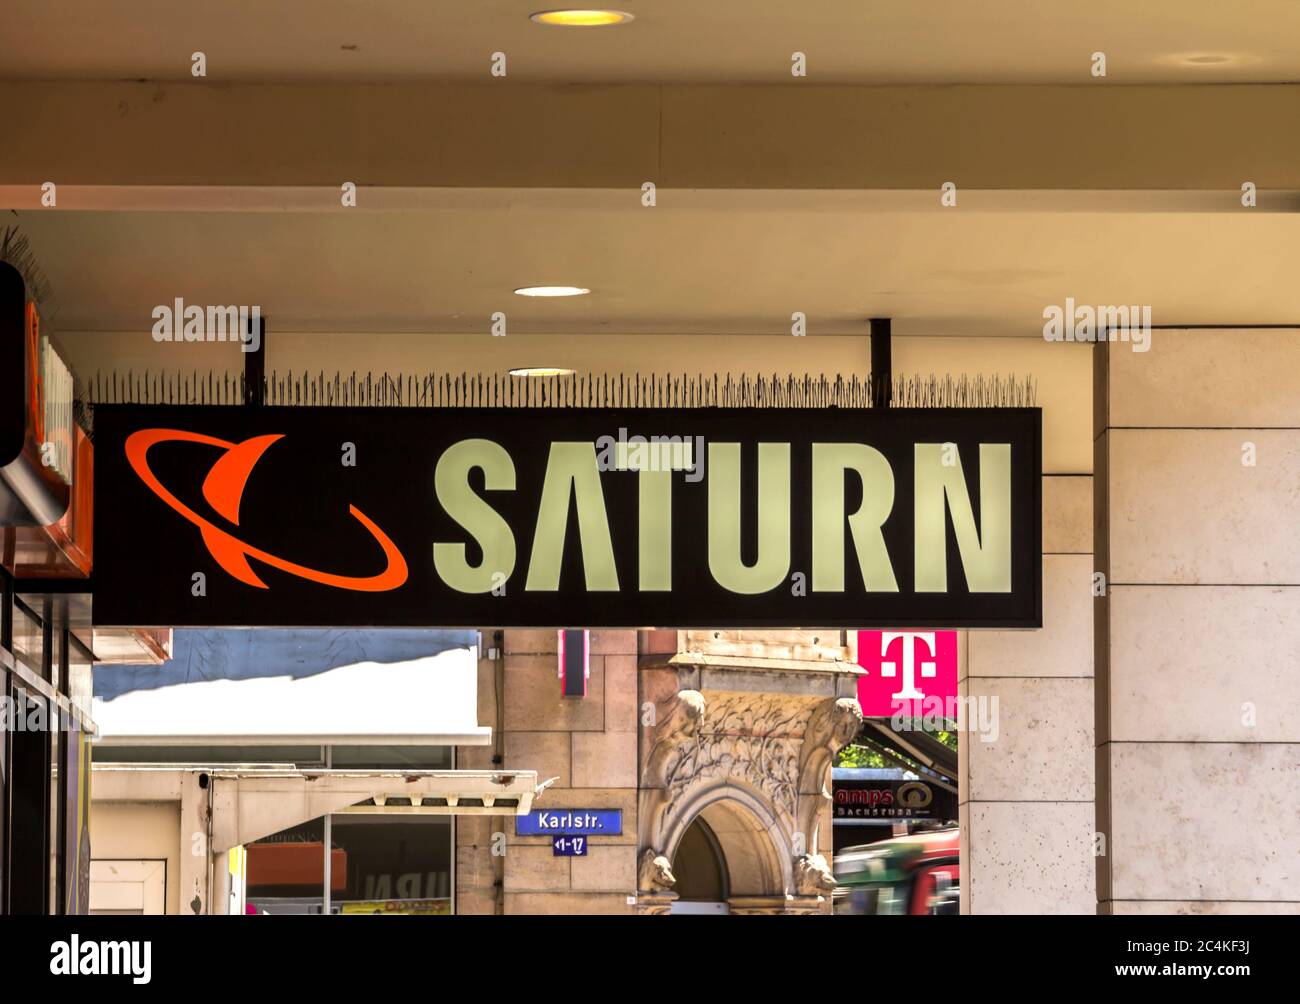 Karlsruhe, Germany - July 4, 2019: SATURN store in Karlsruhe, Saturn is a German chain of electronics stores owned by the German retail trade company Stock Photo